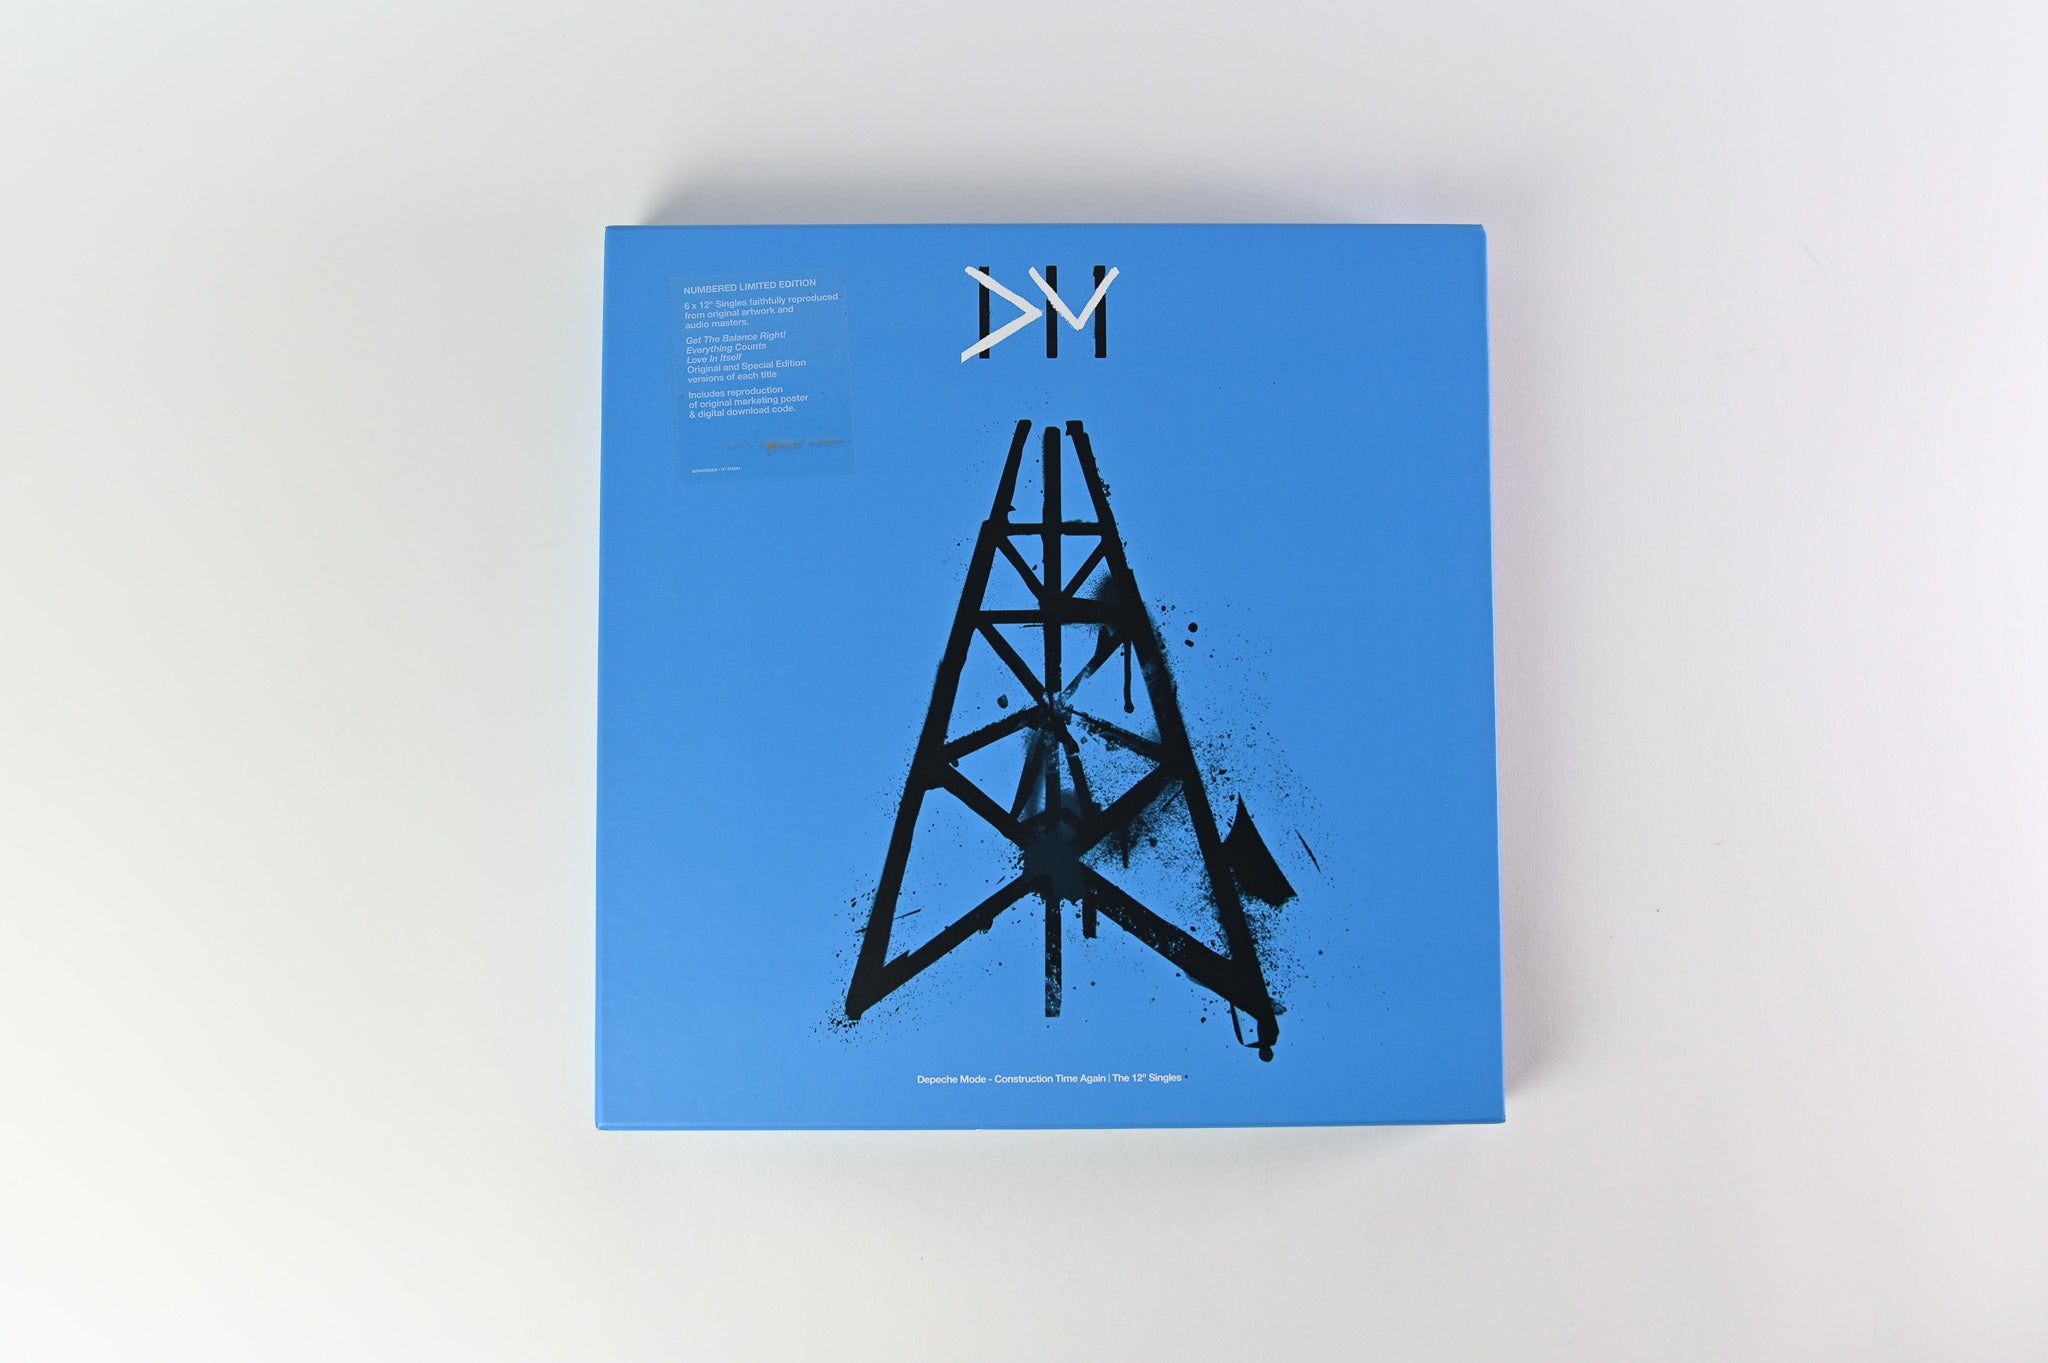 Depeche Mode - Construction Time Again | The 12" Singles on Mute Rhino Ltd Numbered Box Set